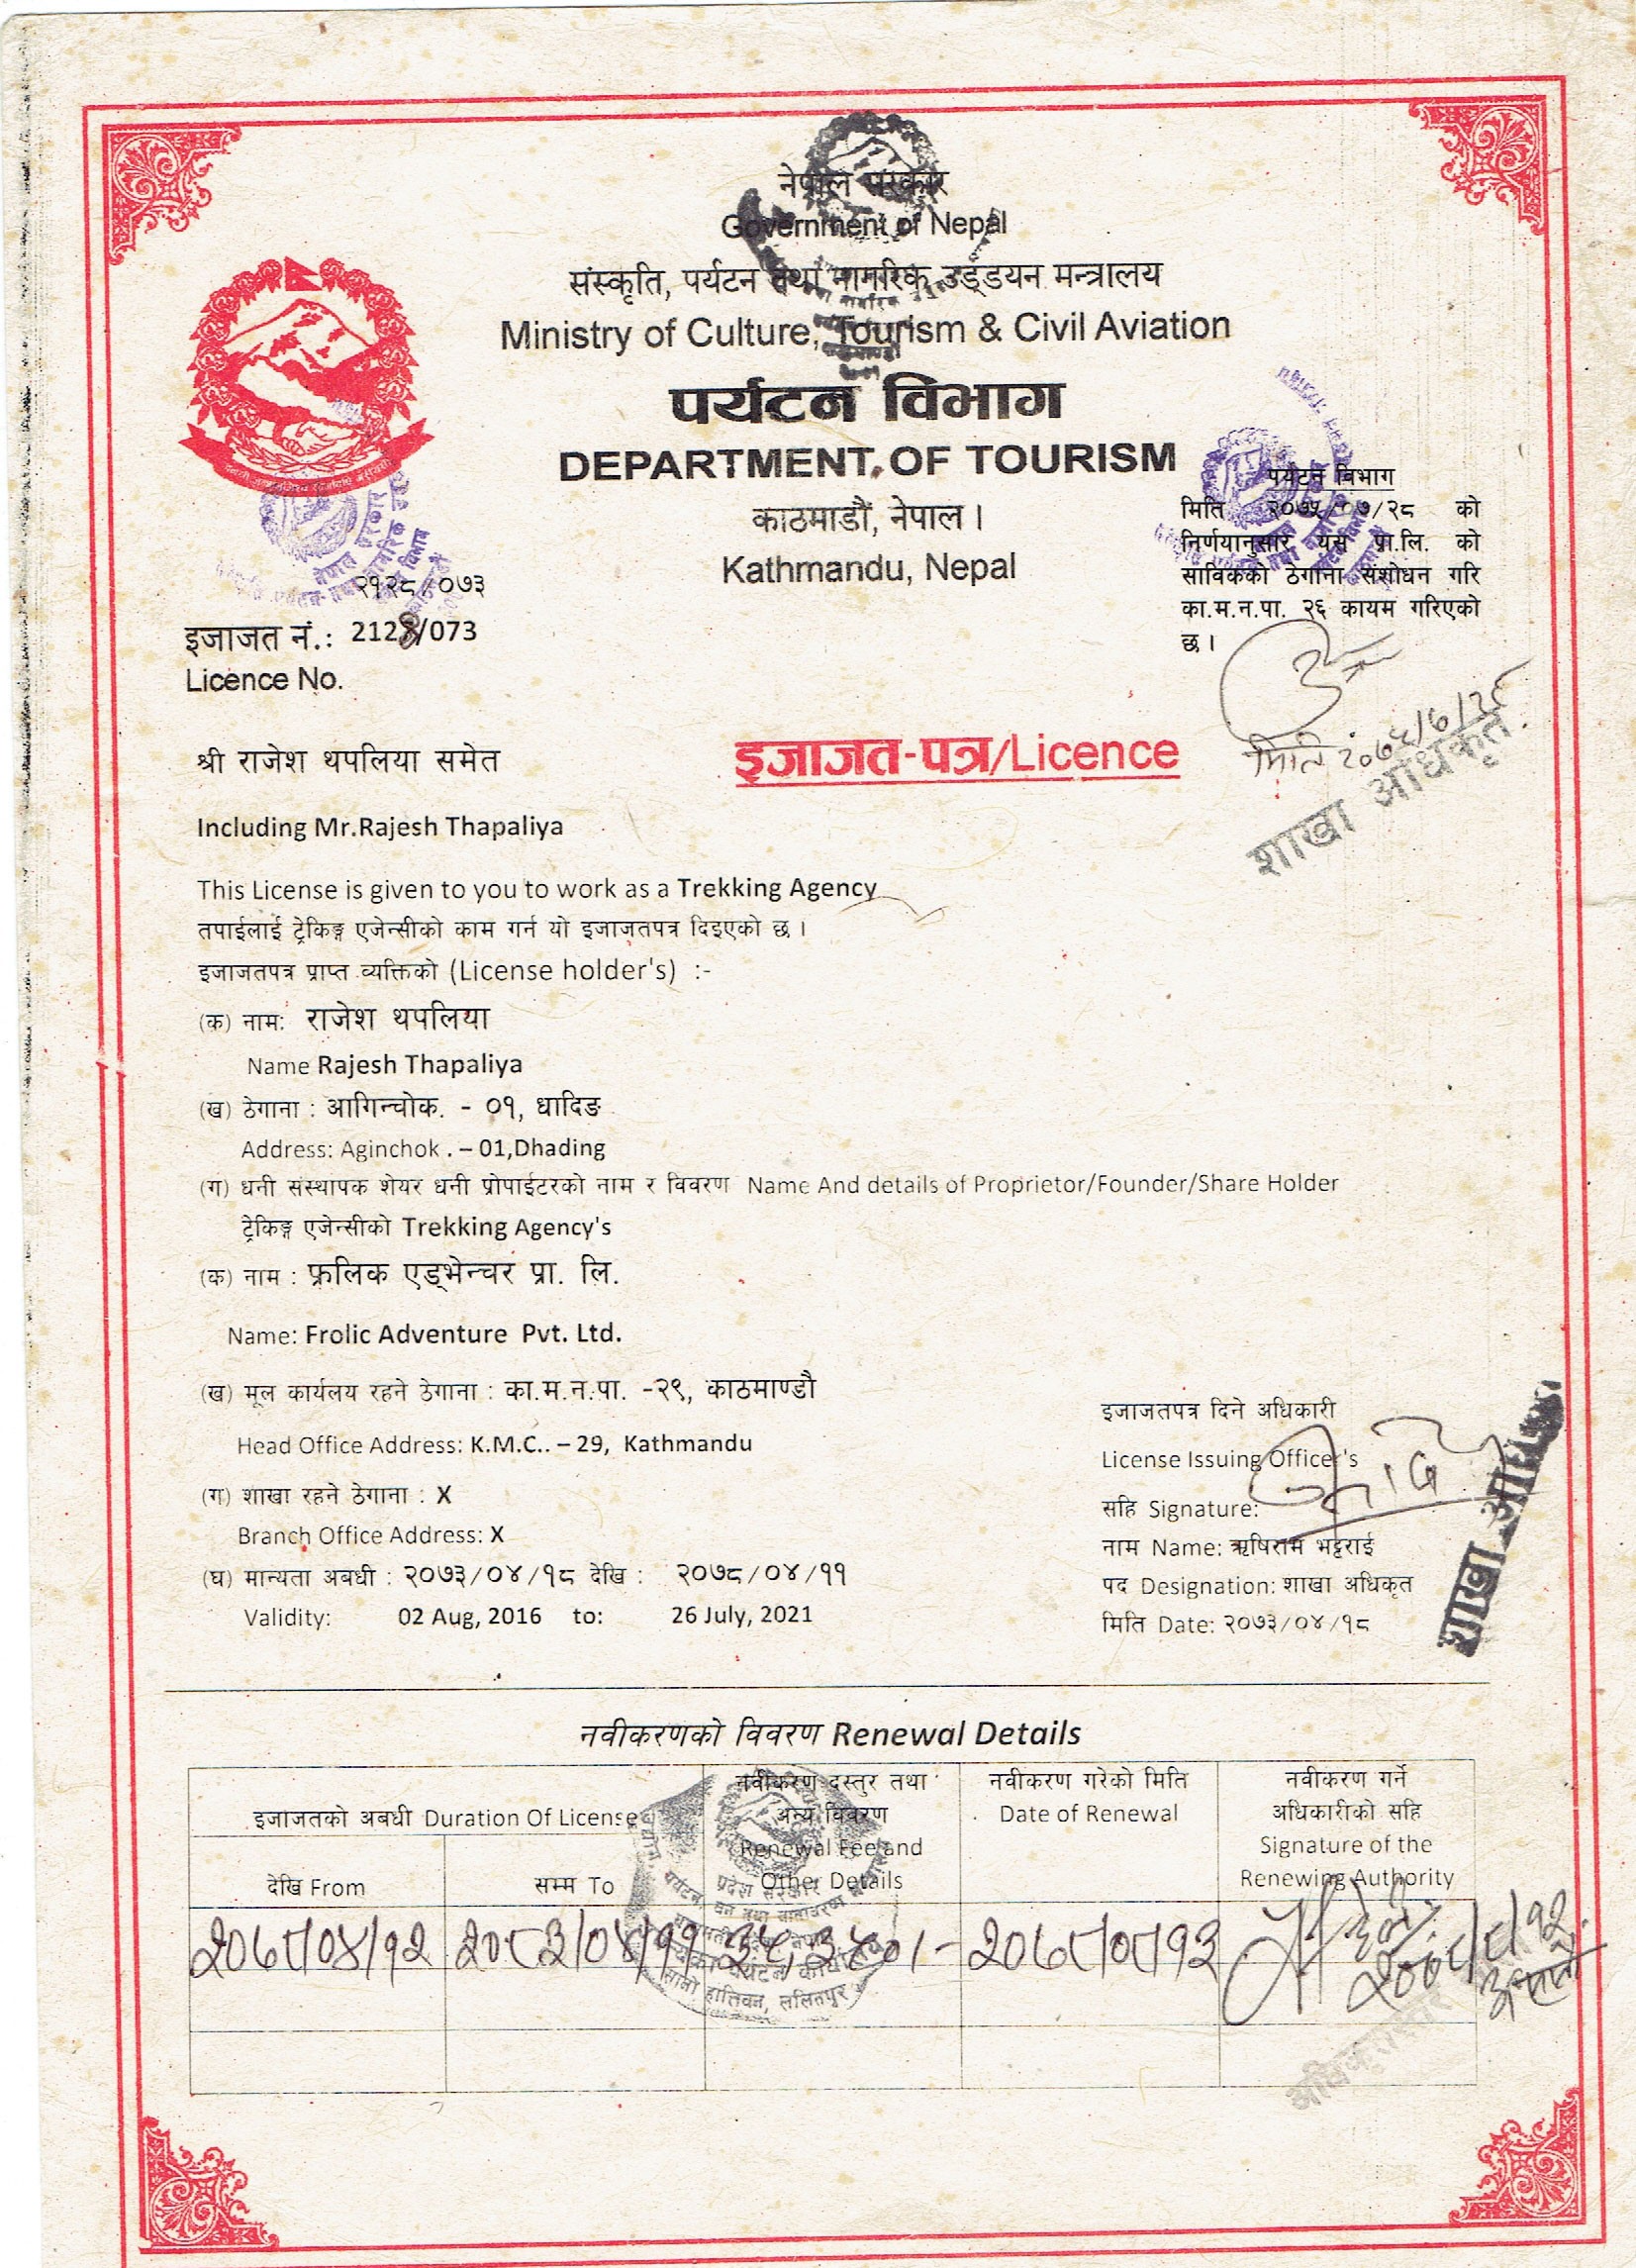 Certificate of Tourism Department